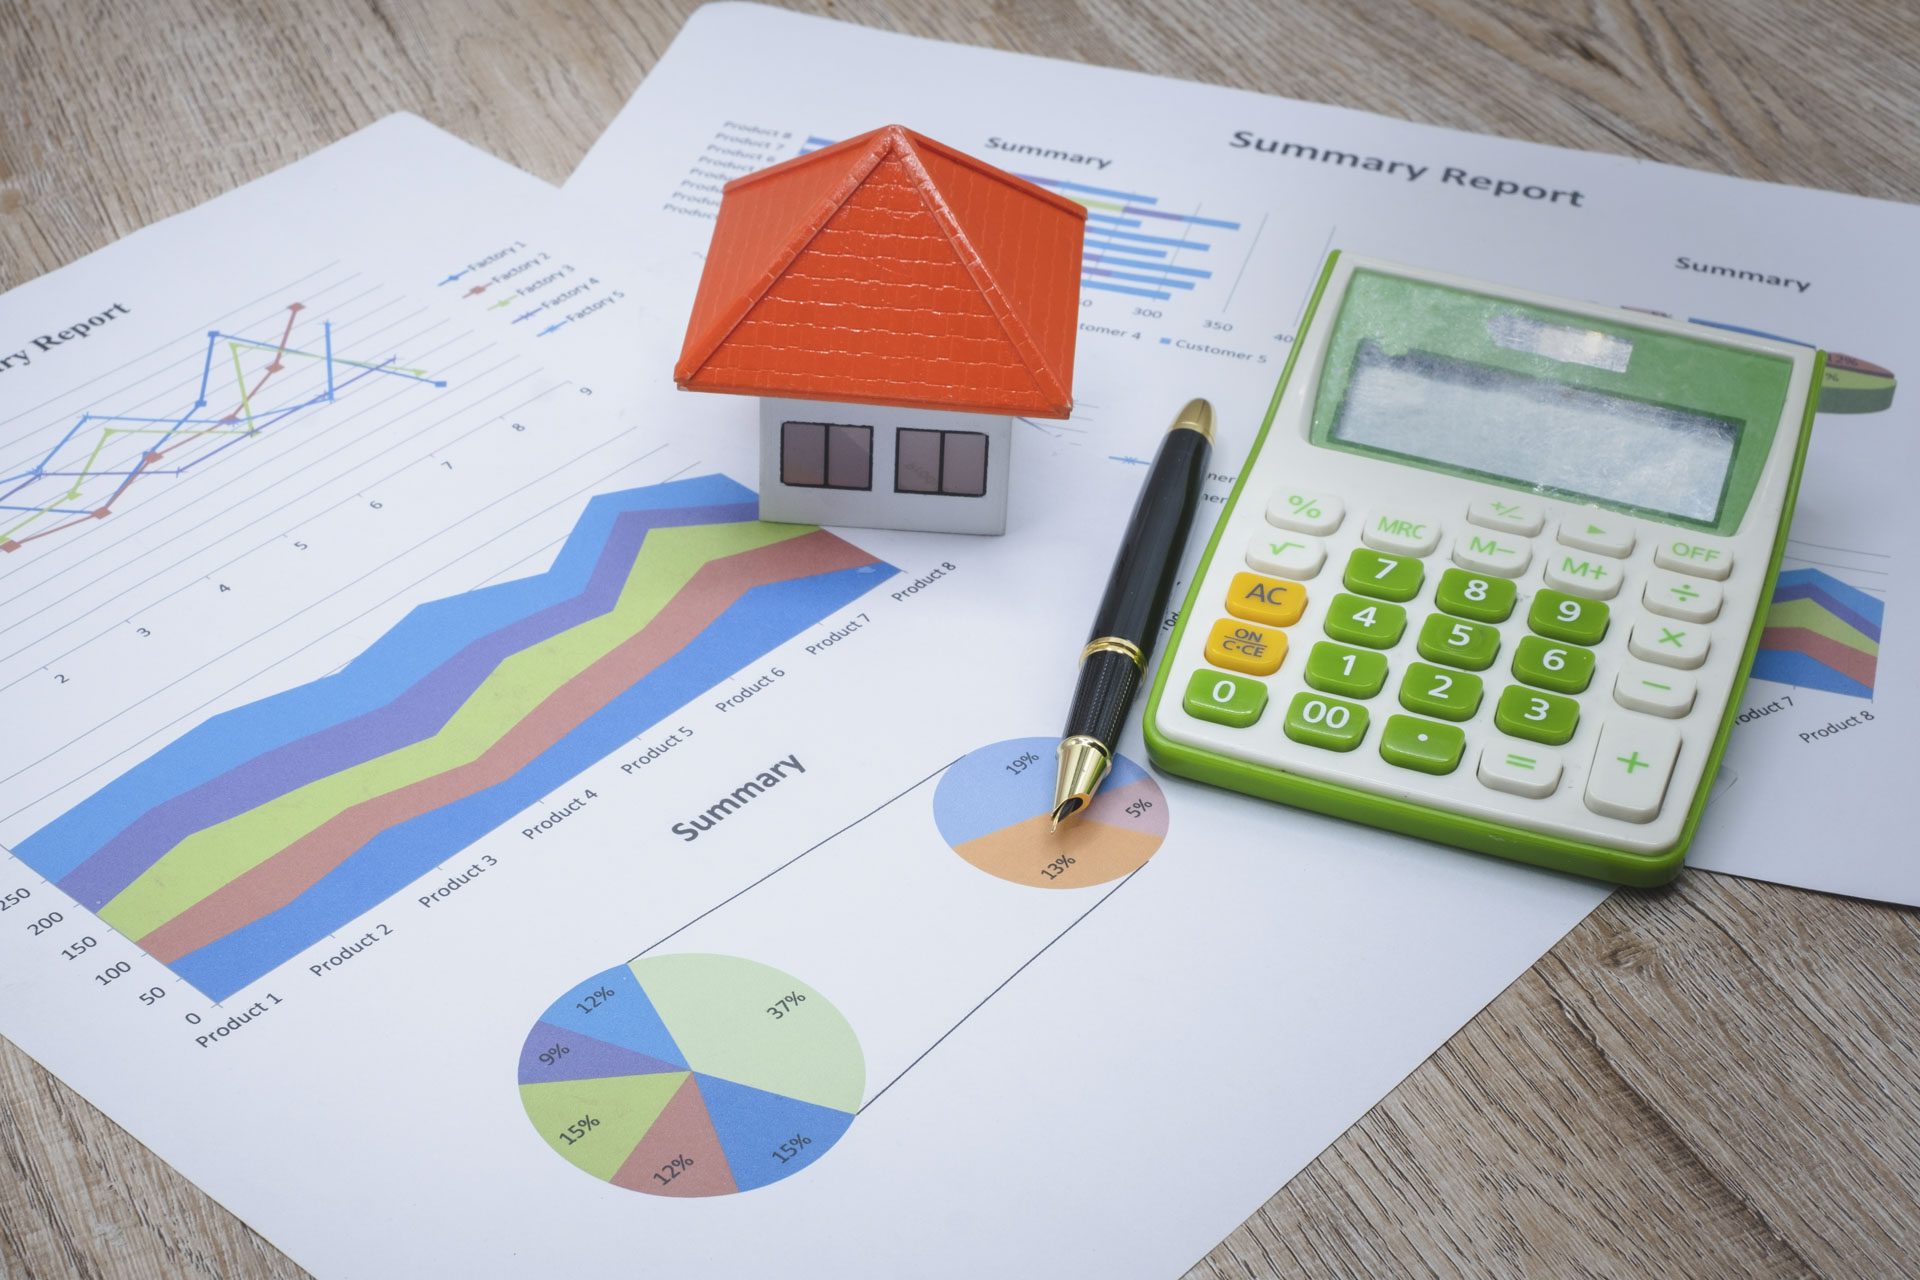 Buy to let tax calculations - paperwork with financial charts and a calculator